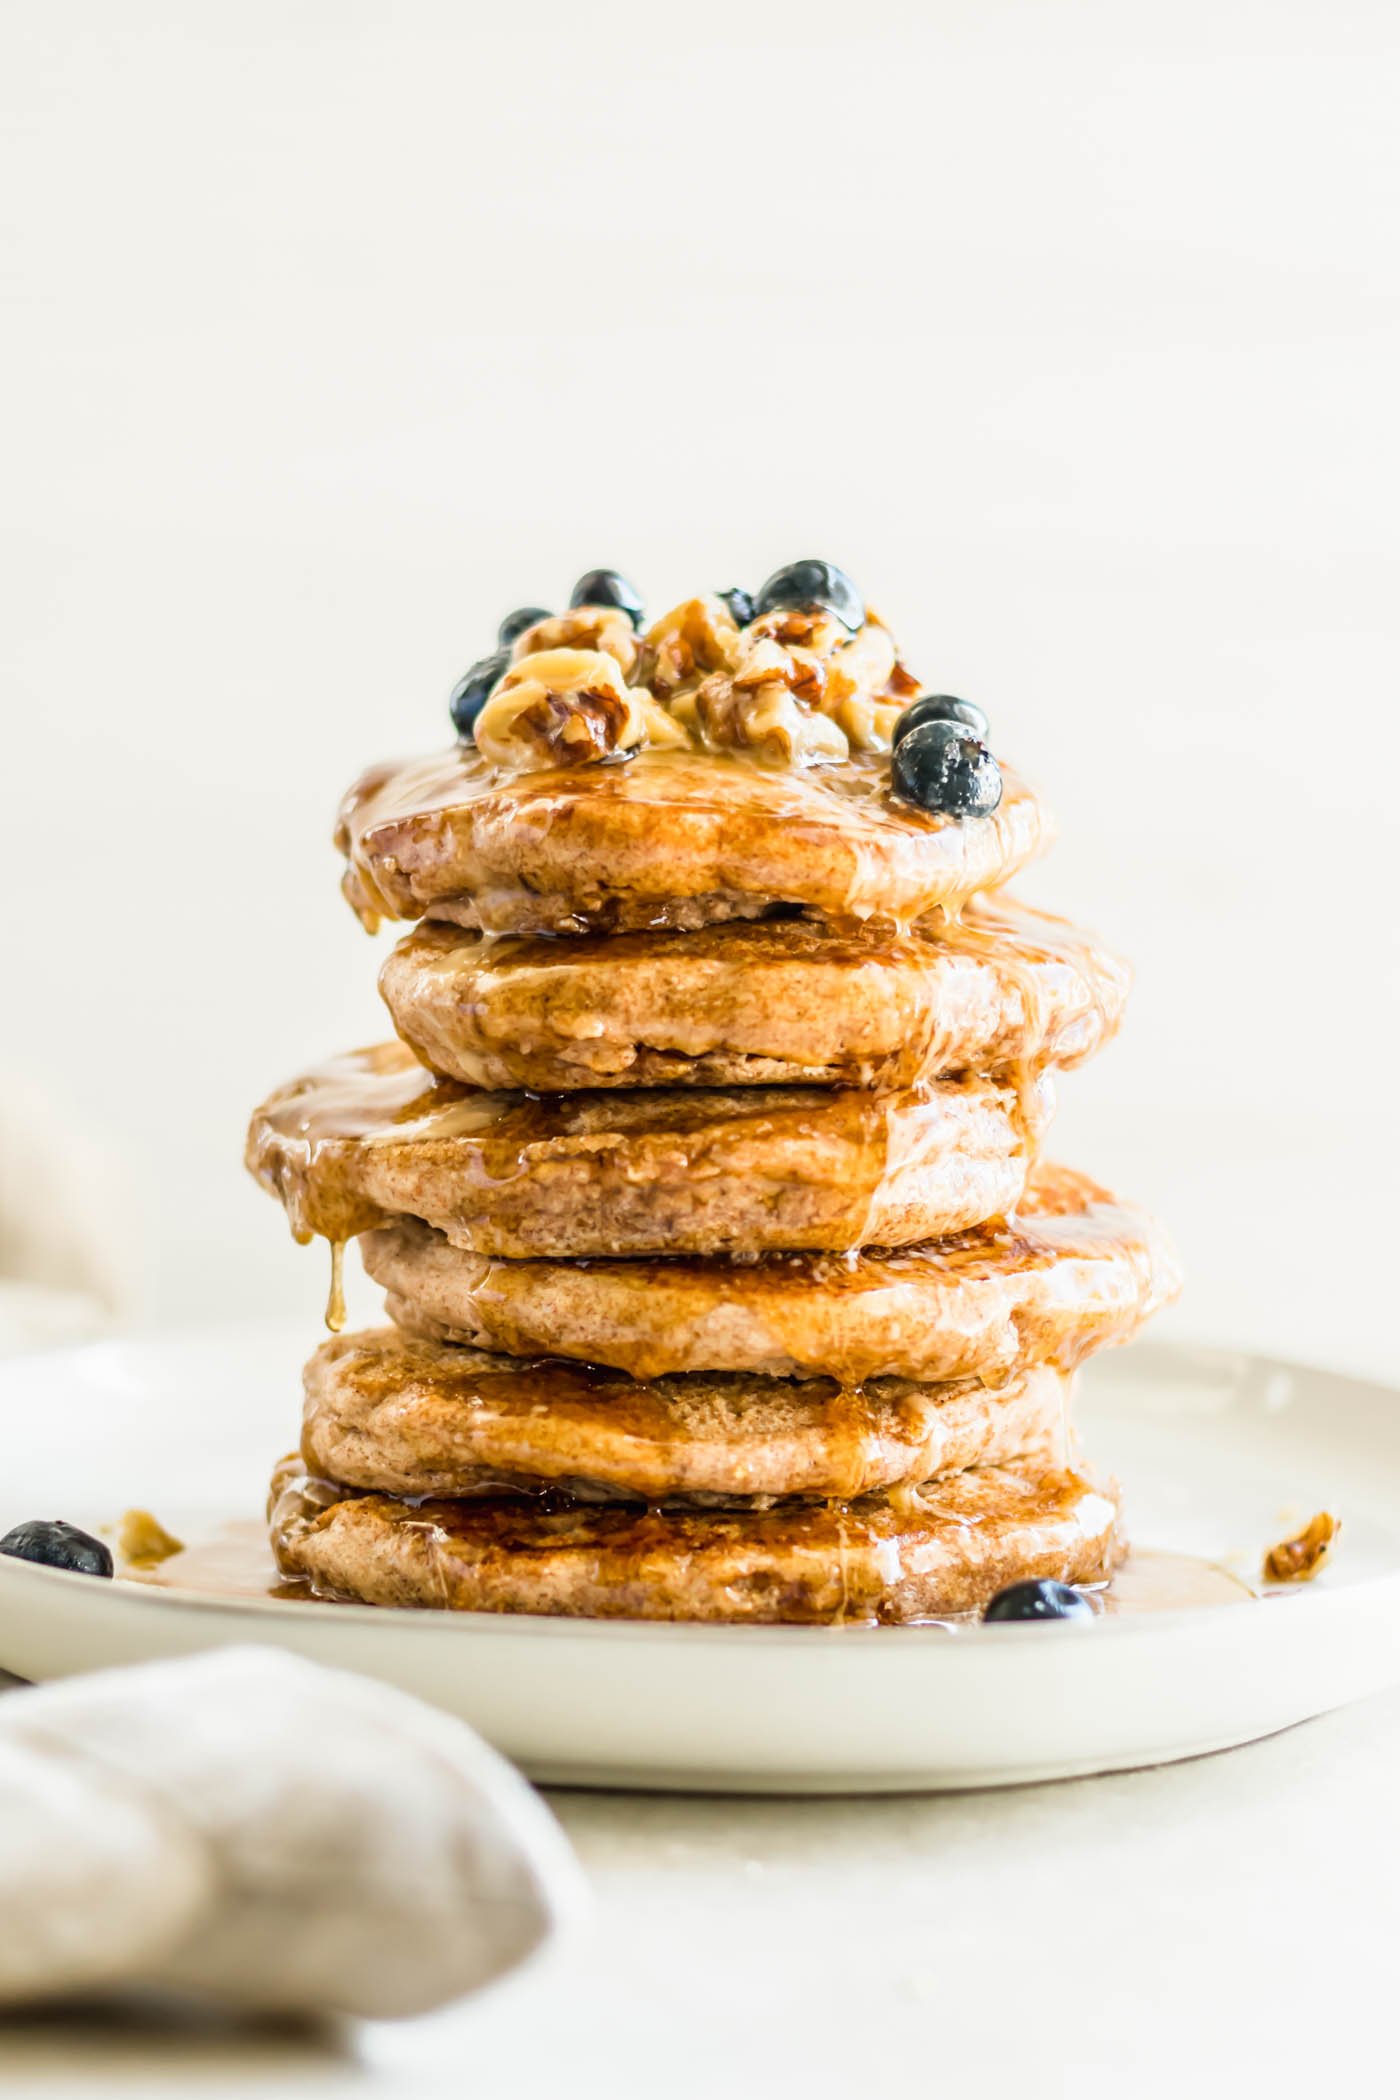 Whole Wheat Griddle Cakes with Fruit Compote